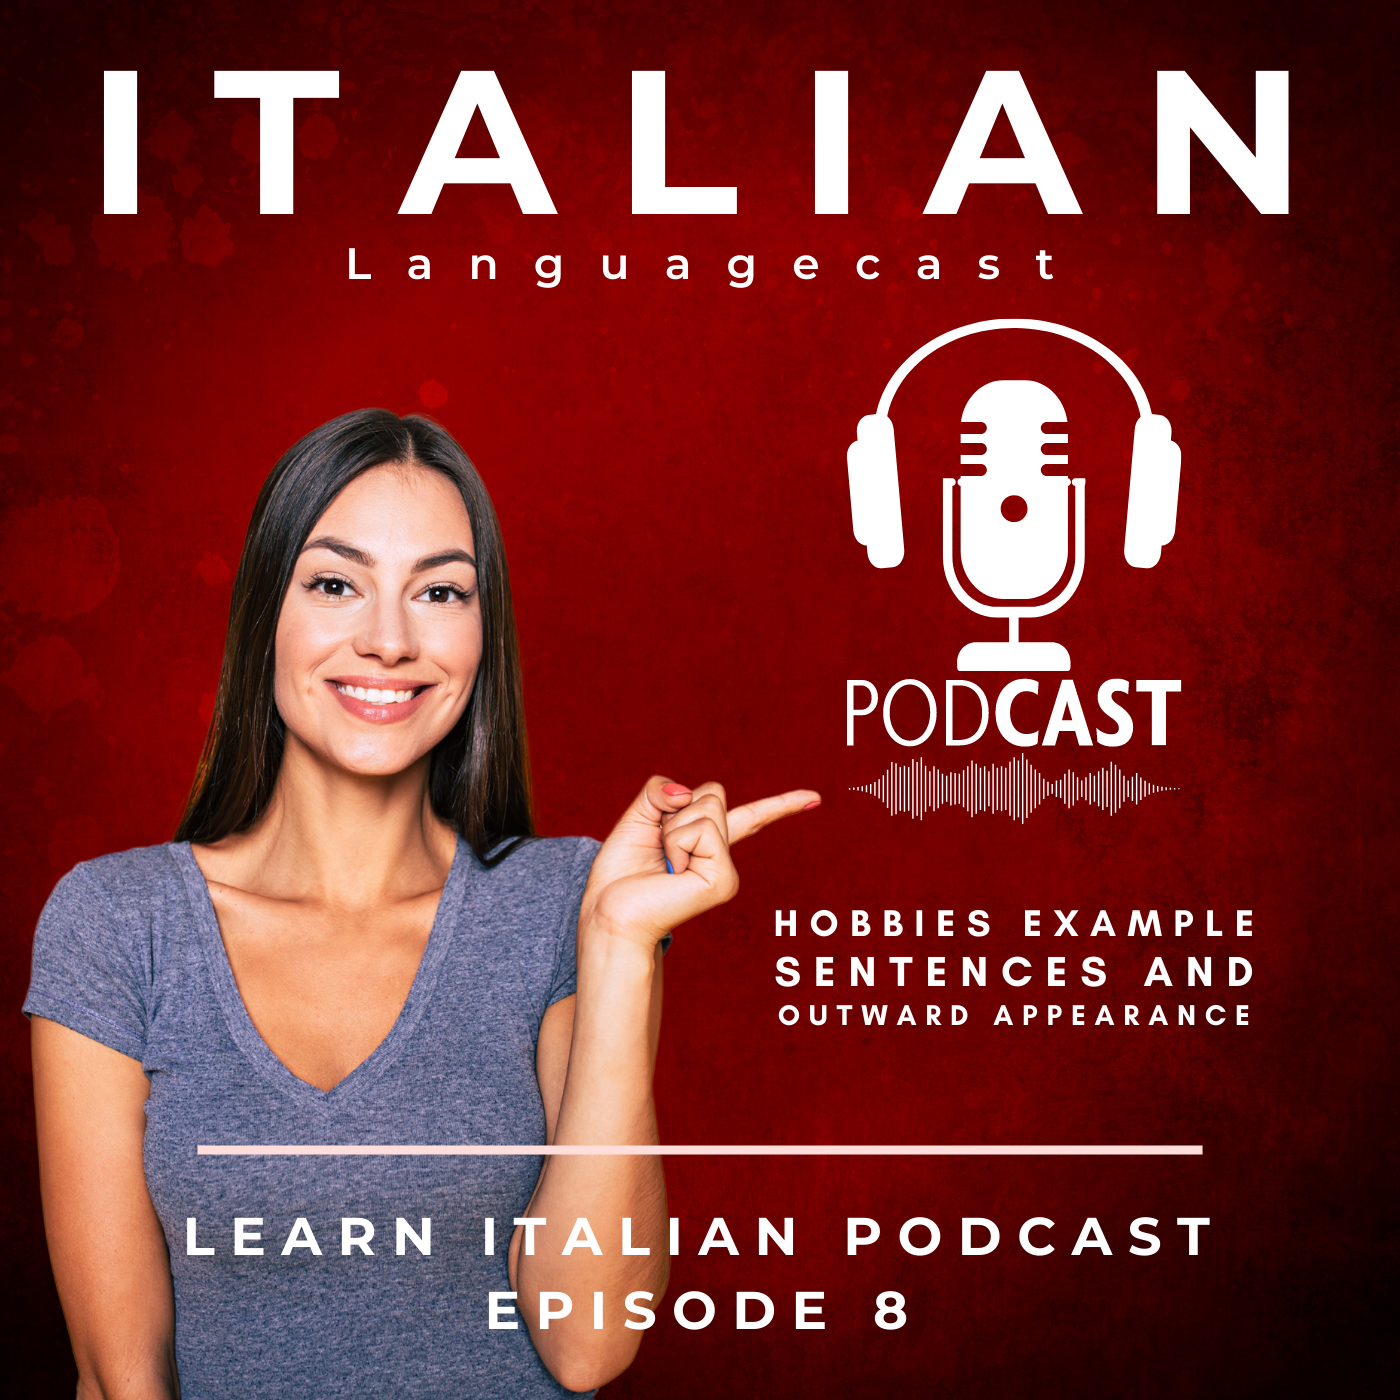 Learn Italian Podcast: Hobbies Example Sentences and Outward Appearance (Episode 8)